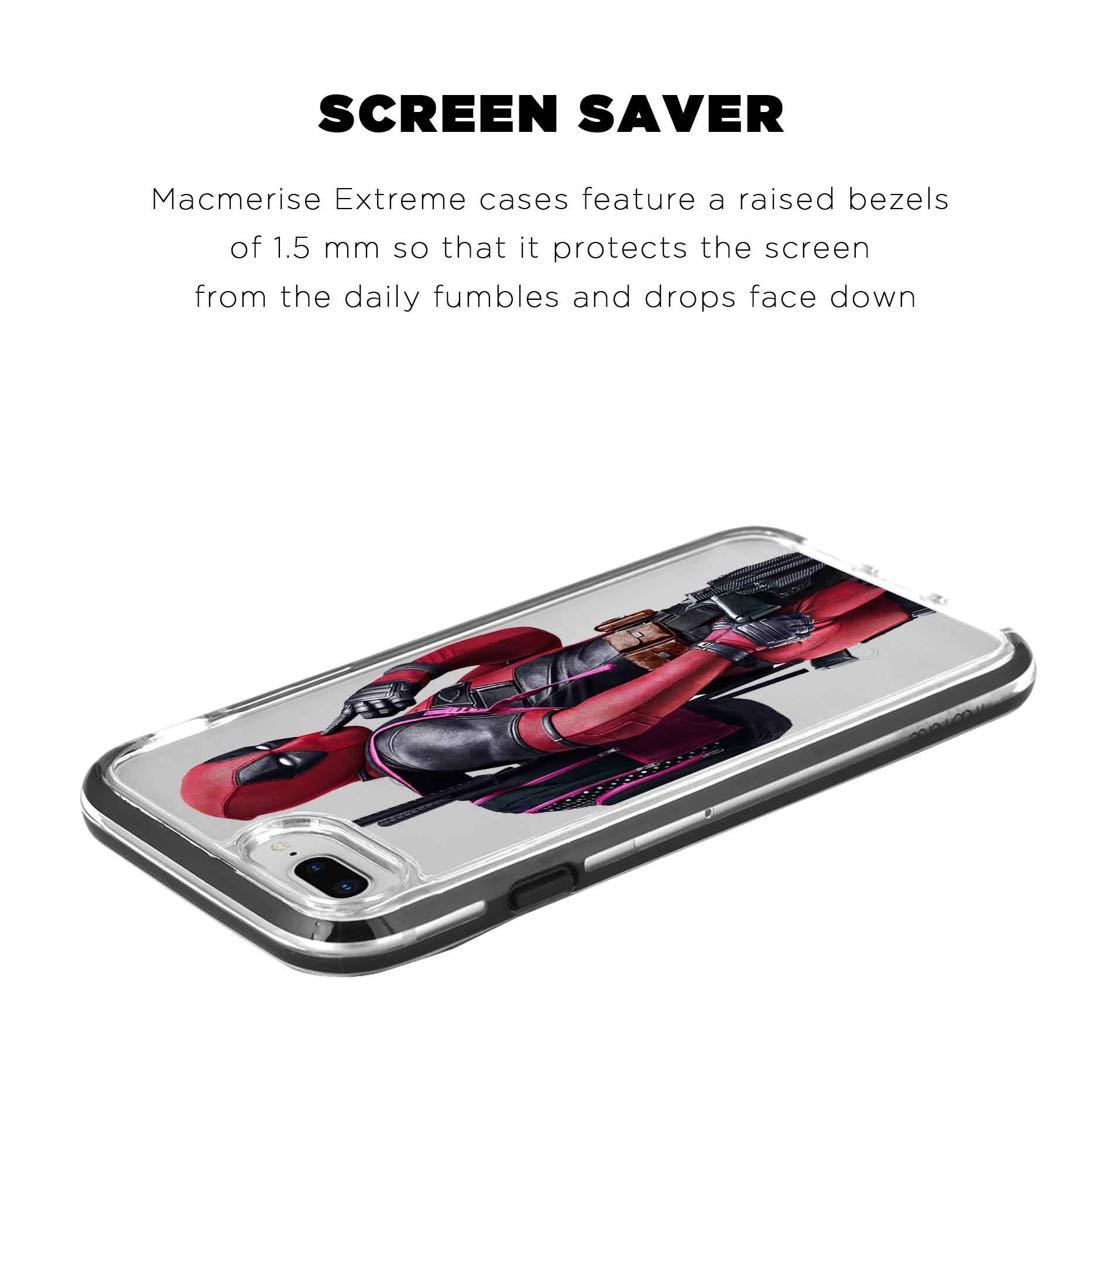 Smart Ass Deadpool - Extreme Phone Case for iPhone 8 Plus